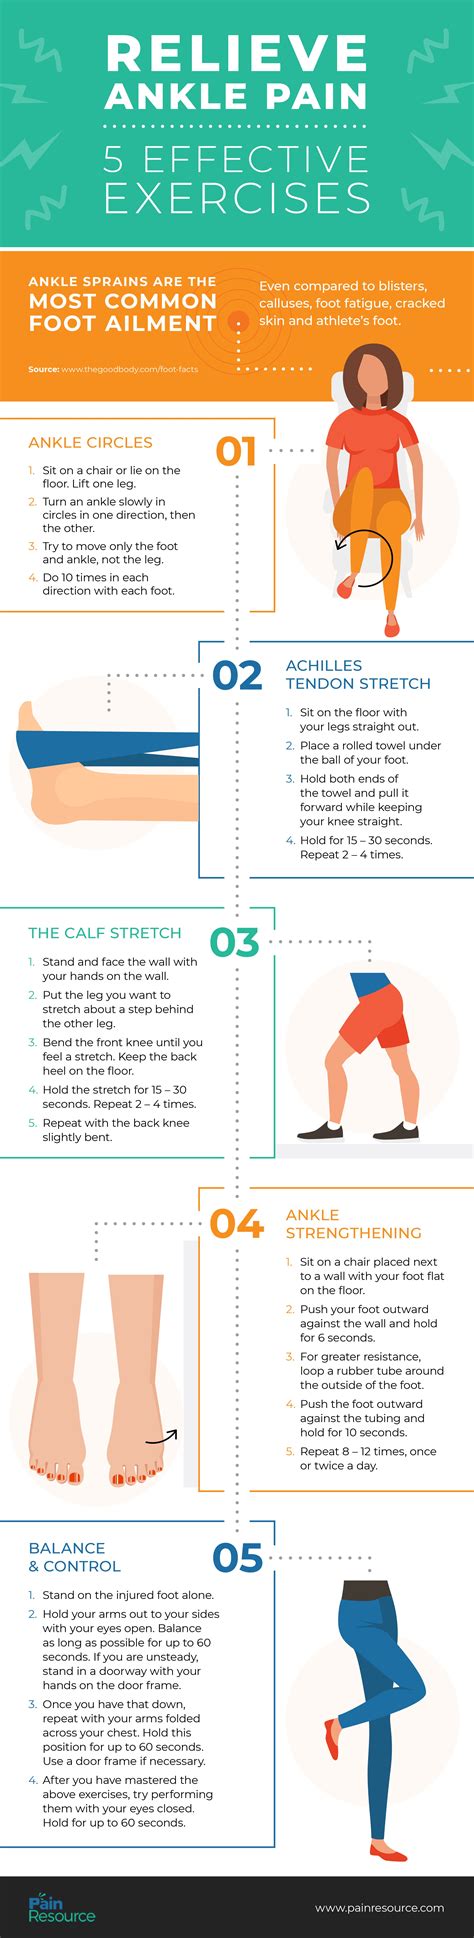 How To Safely Relieve Ankle Pain Infographic Gurusway